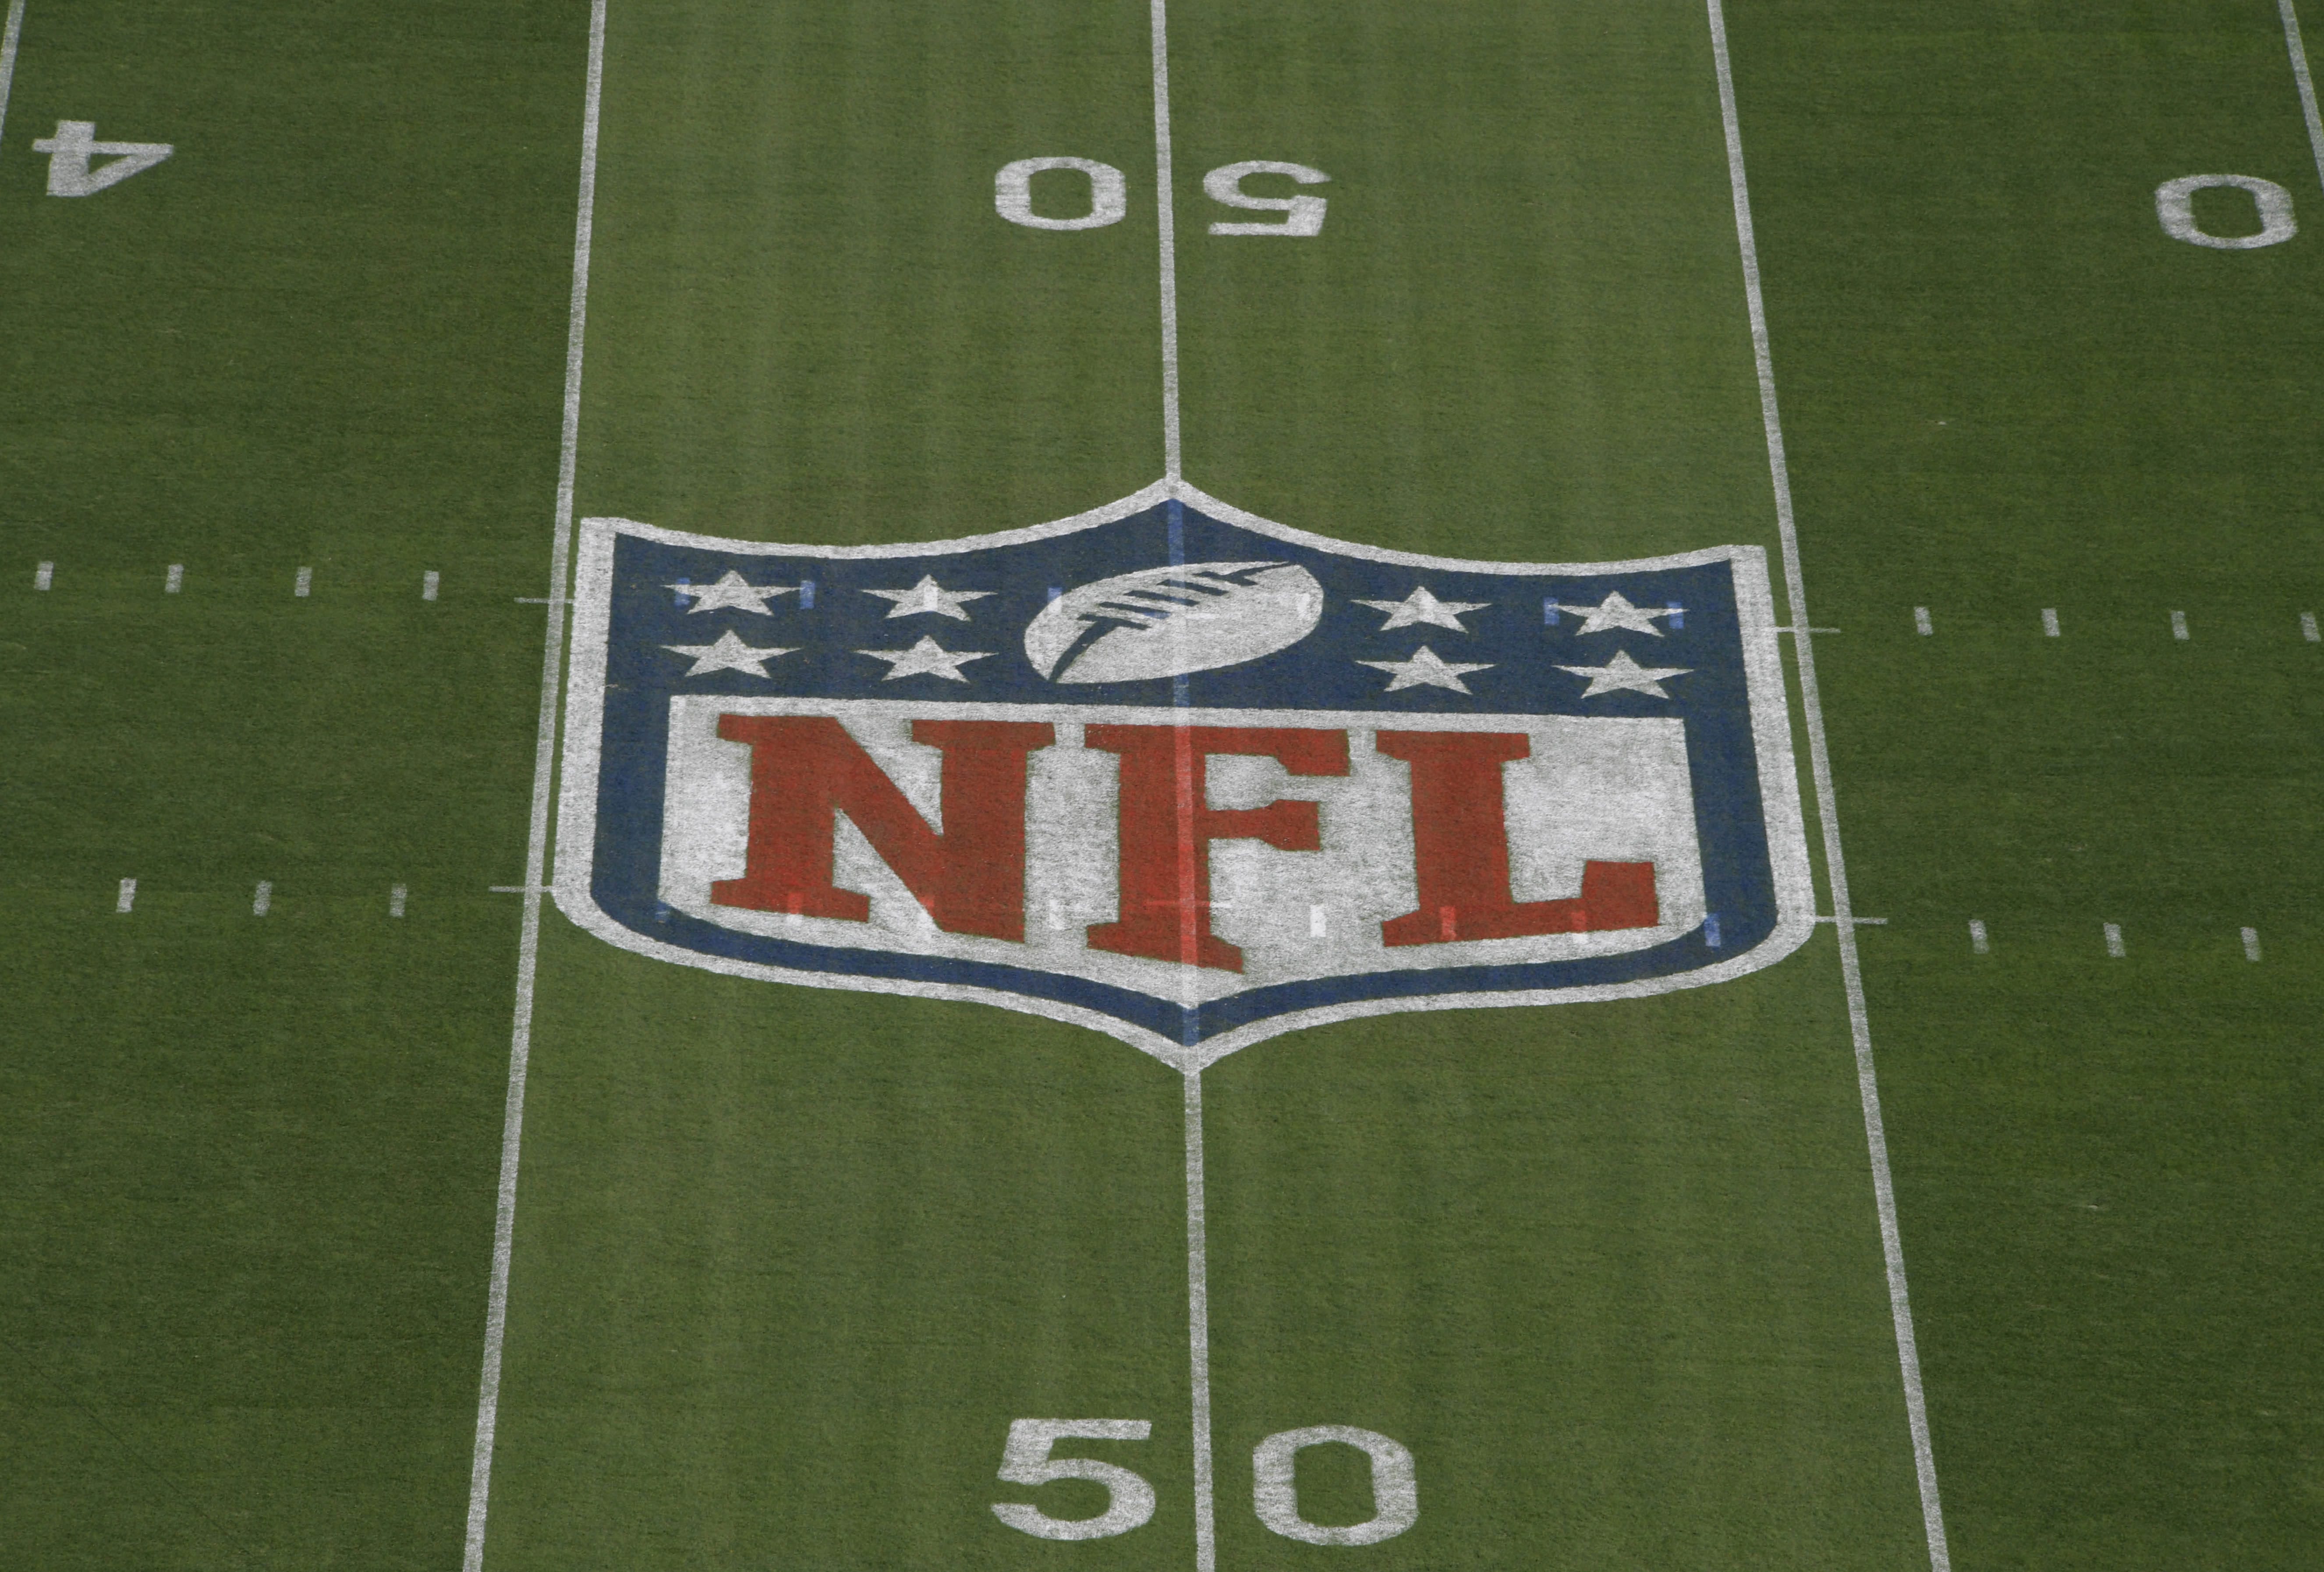 Fox lobbied NFL to move some marquee Sunday TV games to Thursday night